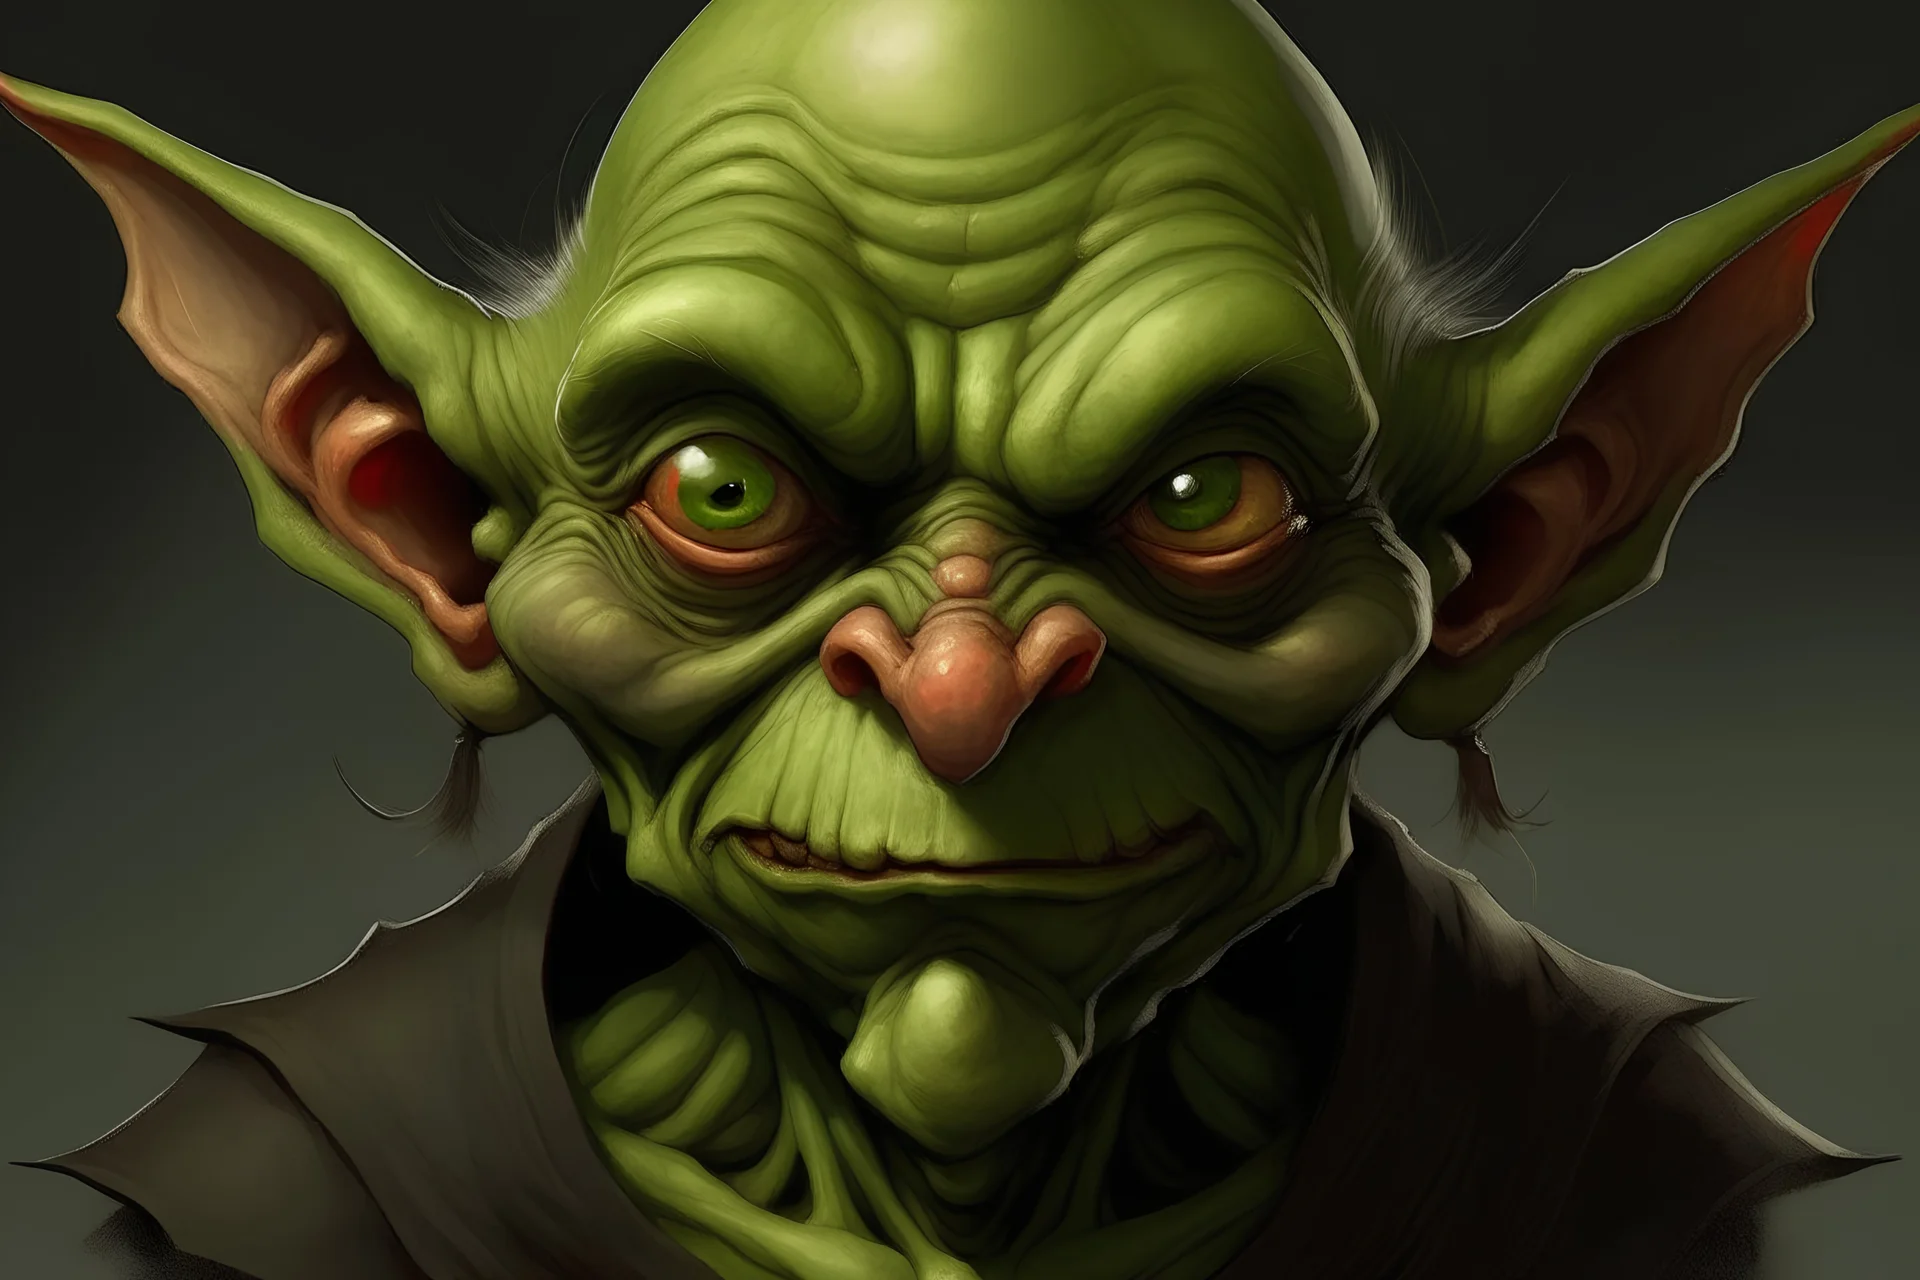 The mythical creature known as the Goblin is a small, humanoid being that stands approximately three feet tall. Its overall appearance is that of a human-like figure, but with some distinct differences. The head of the Goblin is large and round, with two beady eyes that are often colored green or red. The nose is flat and wide, while the mouth is filled with sharp, pointy teeth. The ears are large and pointed, adding to the otherworldly appearance of this creature. As for clothing or fur, the